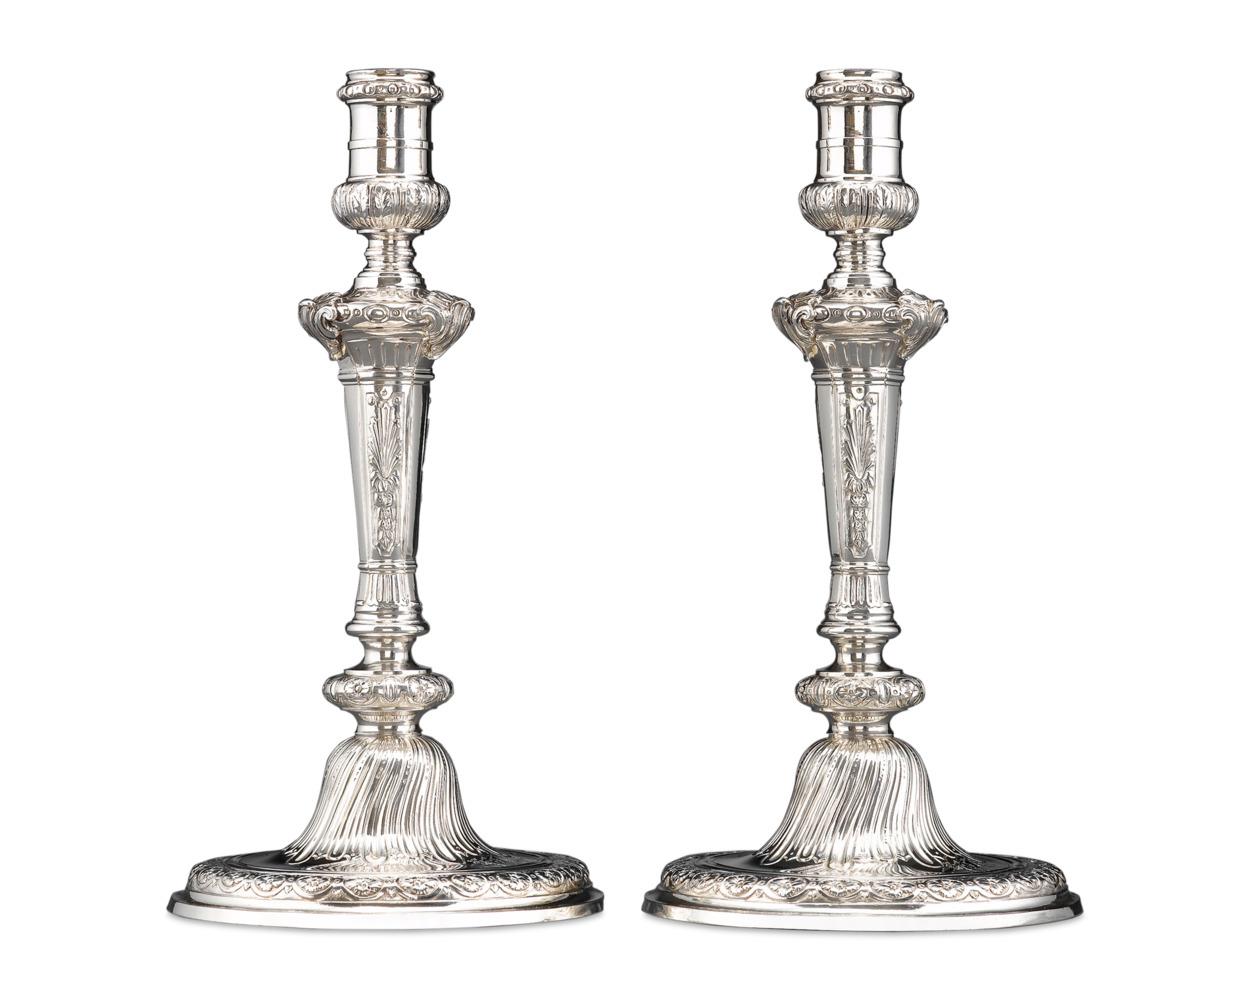 An outstanding pair of sterling silver candlesticks by English silversmith Alexander Johnston. Reflecting the mid-18th century Georgian taste for the Rococo style, these candlesticks feature deeply chased decoration, from shells and palms to